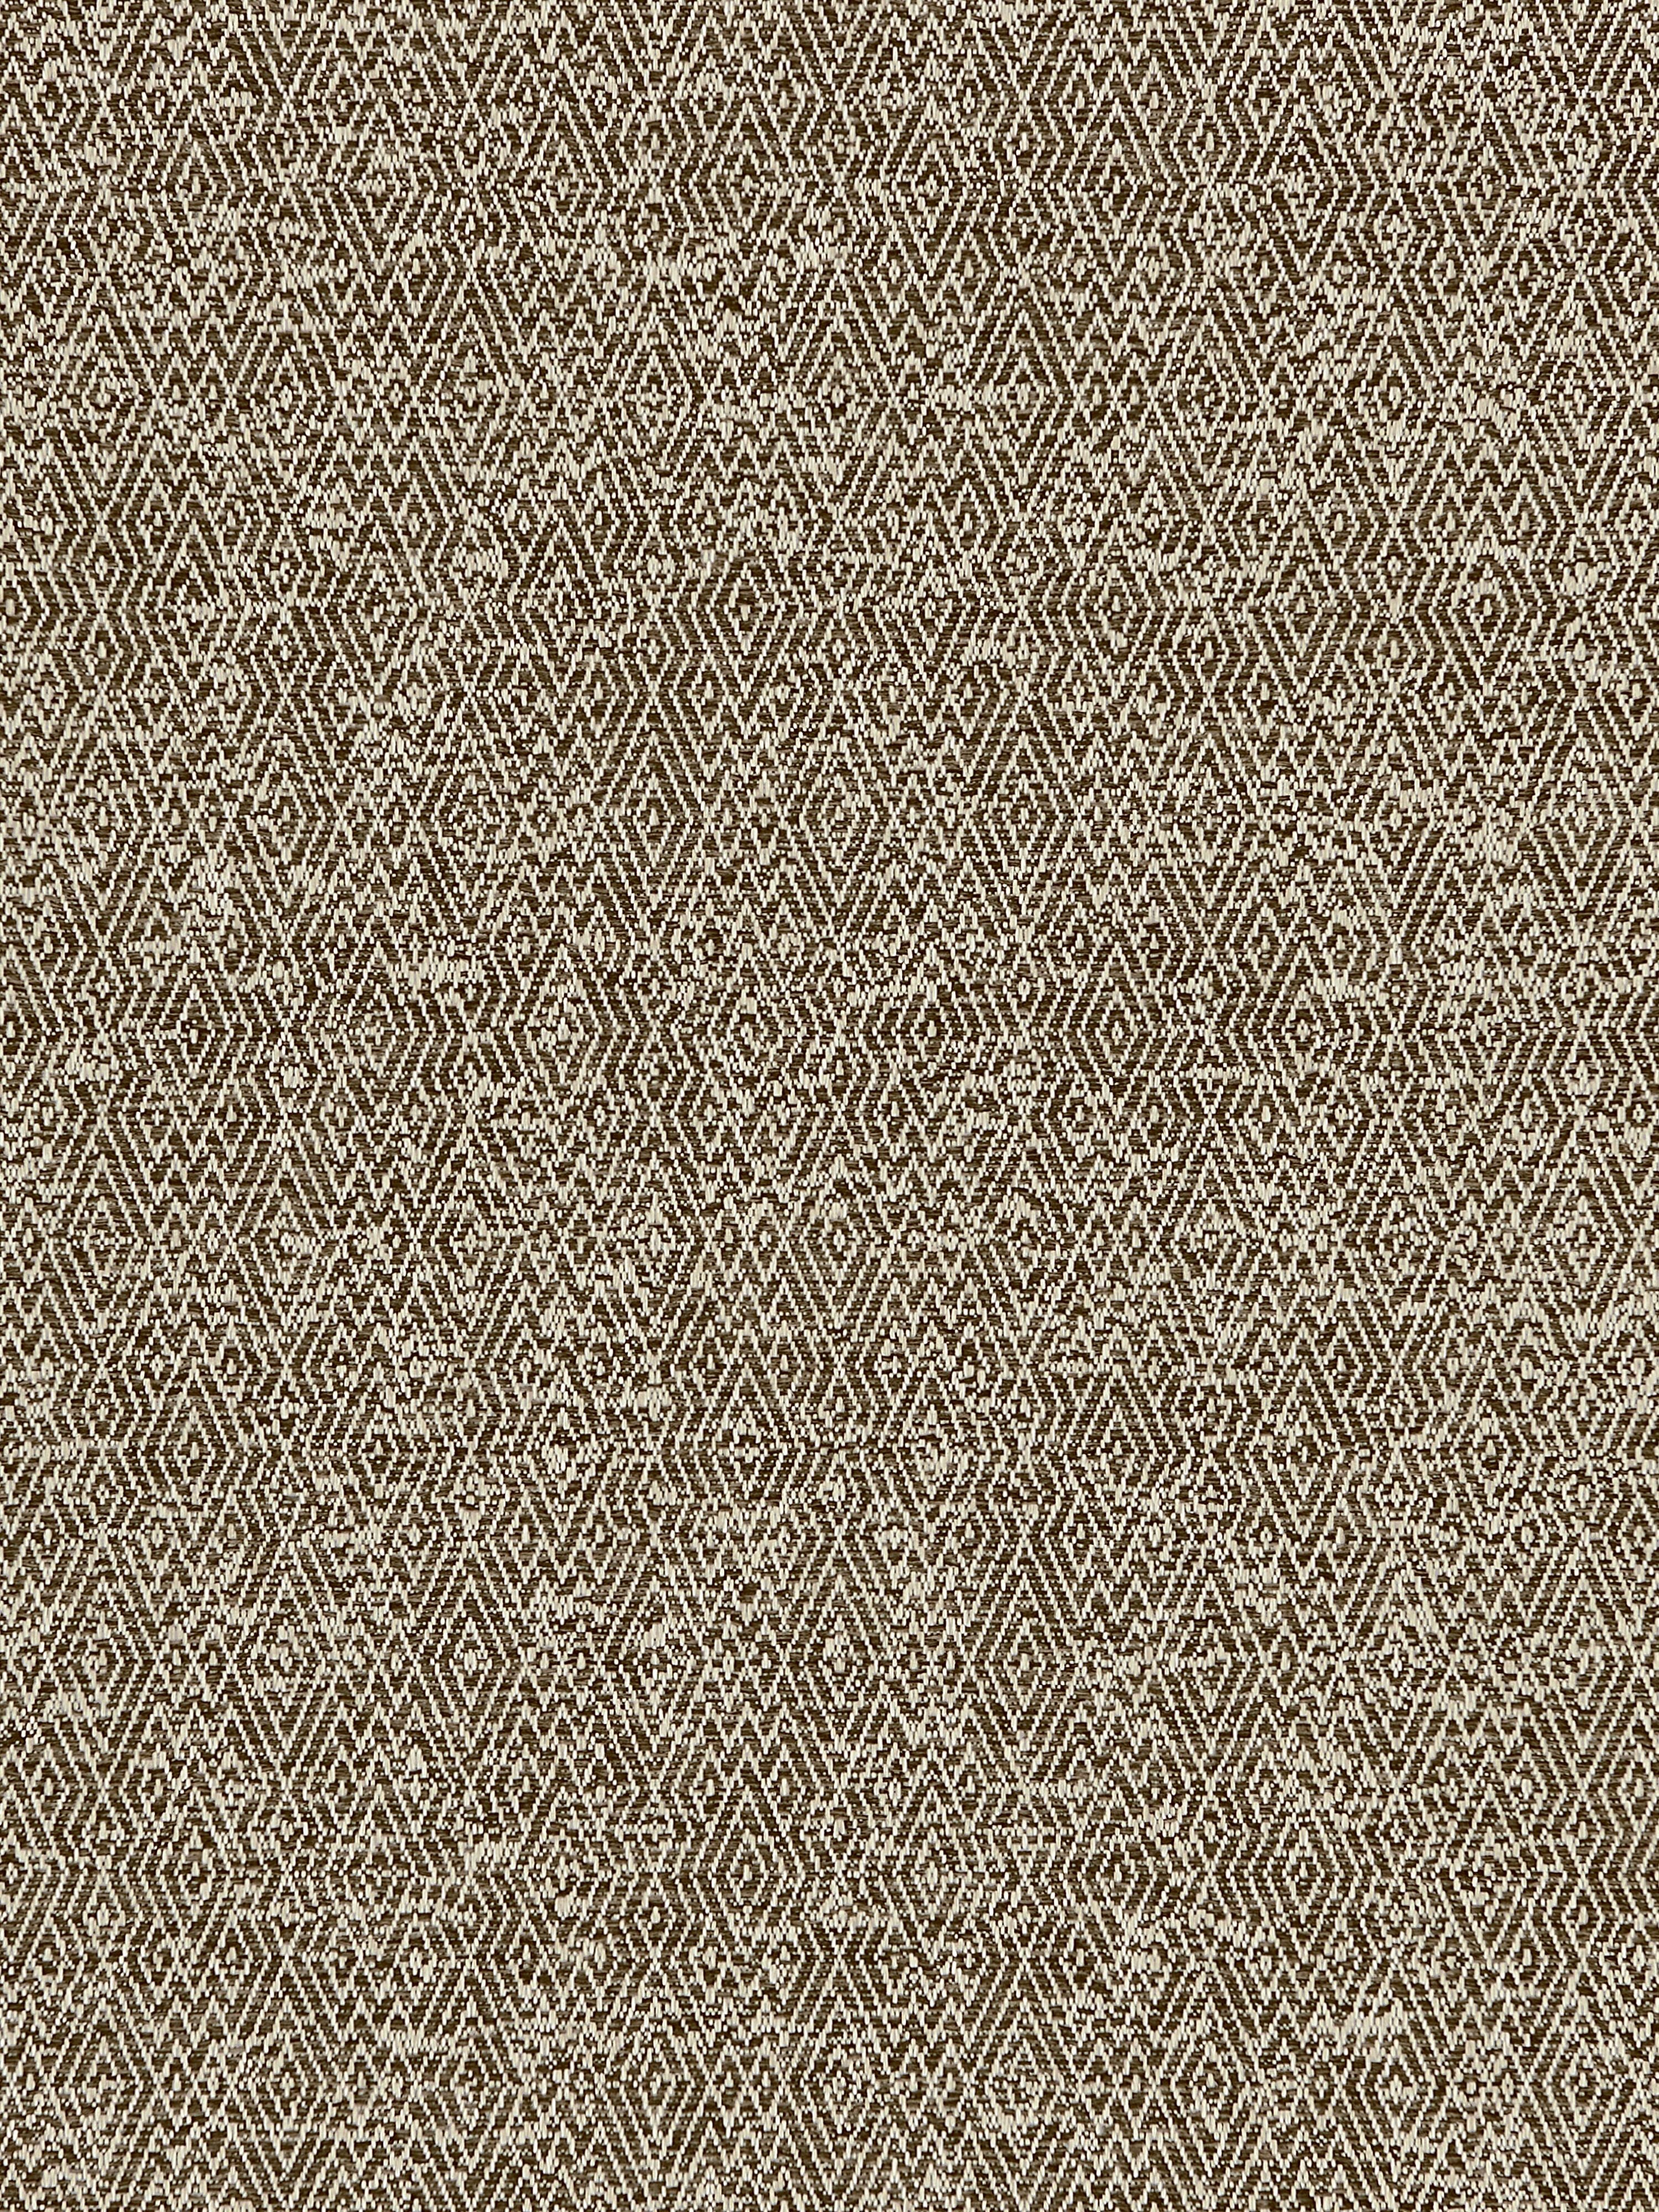 La Caleta fabric in bark color - pattern number NK 0061CALE - by Scalamandre in the Old World Weavers collection